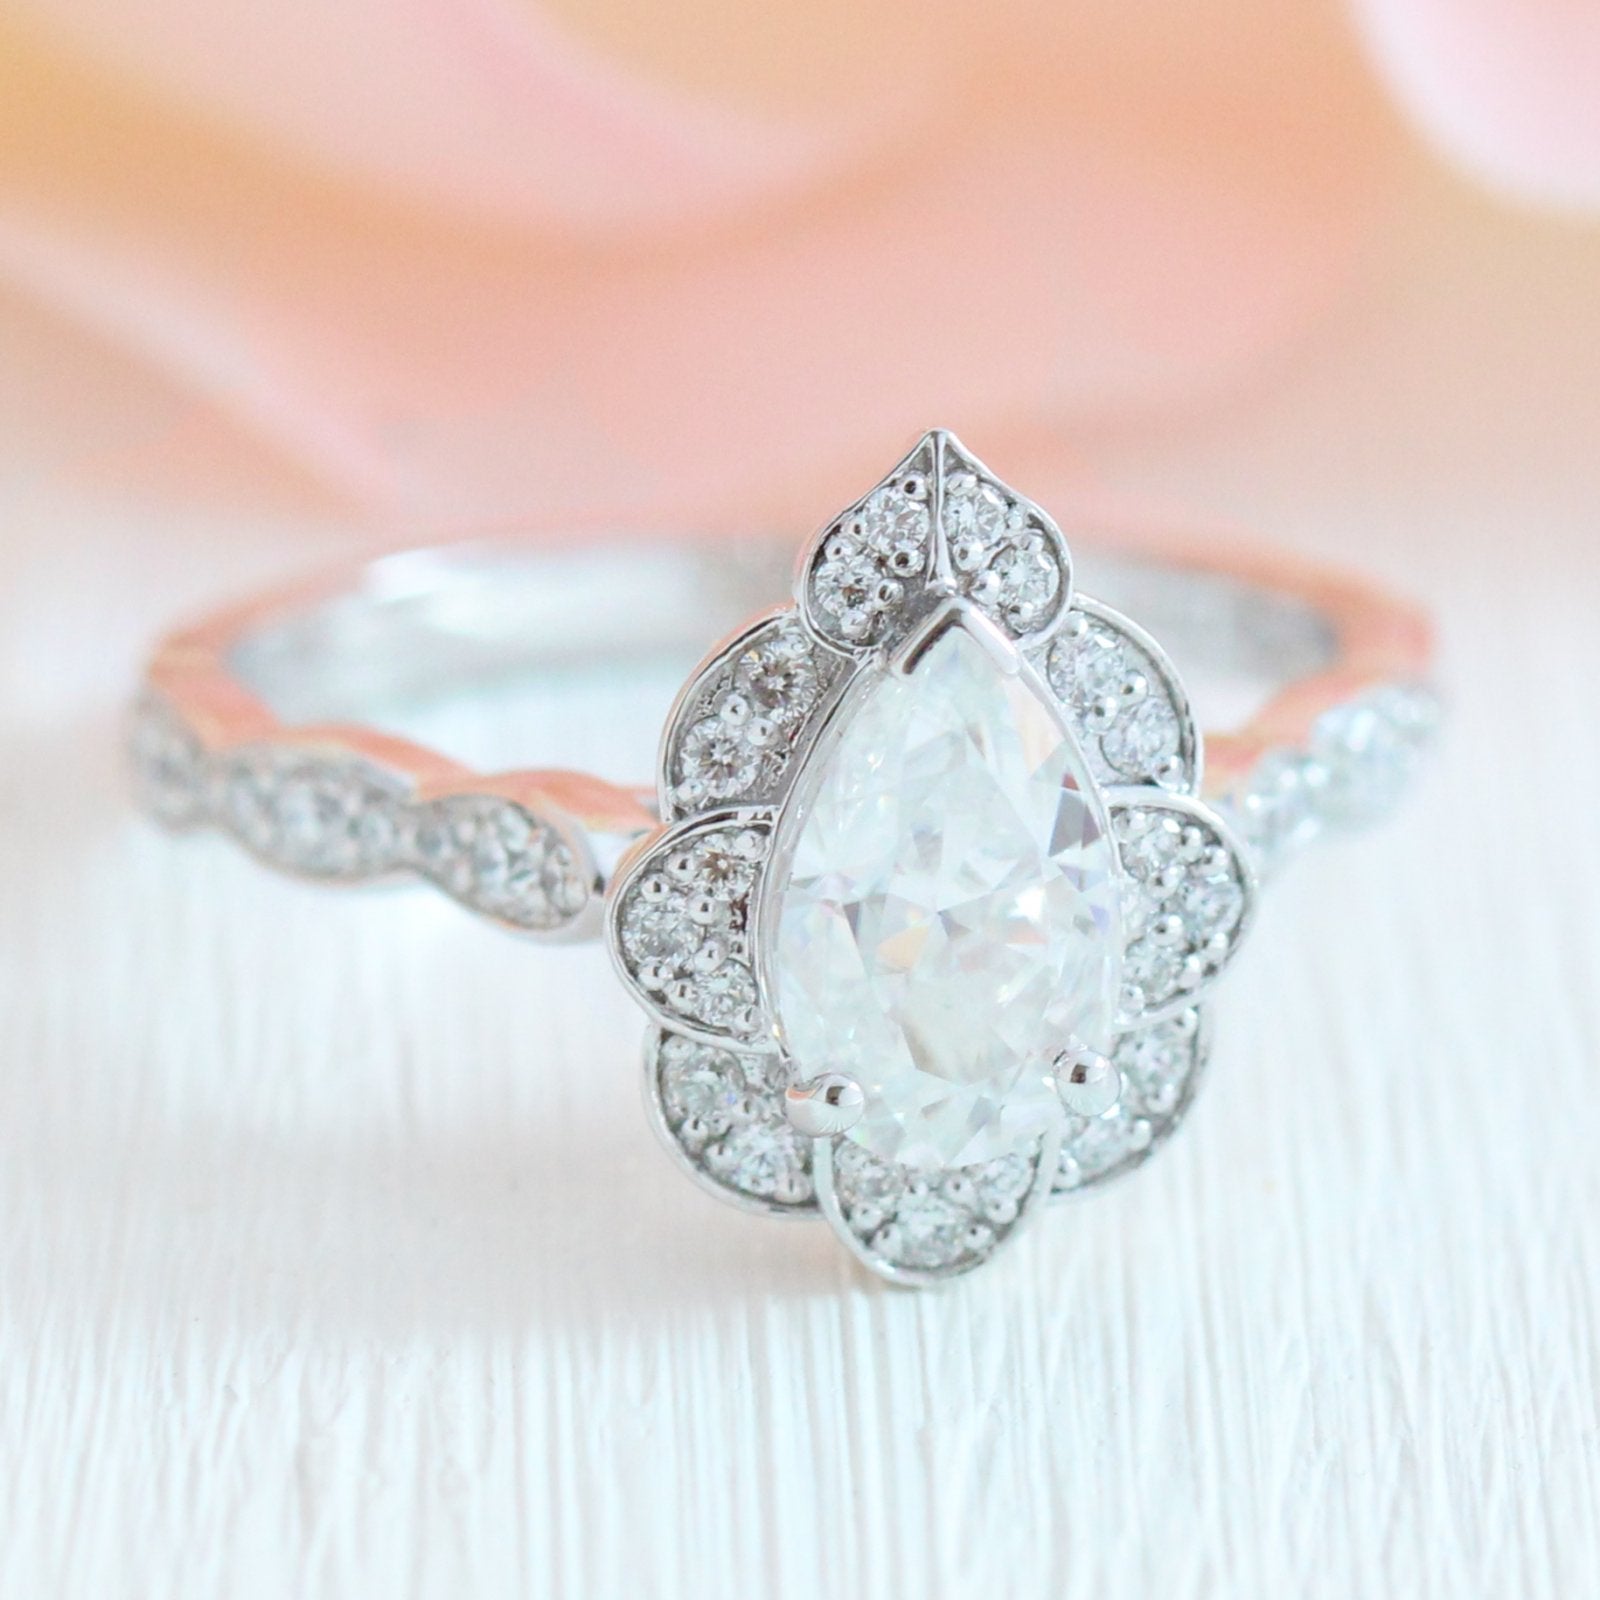 Vintage floral pear moissanite engagement ring white gold diamond scalloped band by la more design jewelry